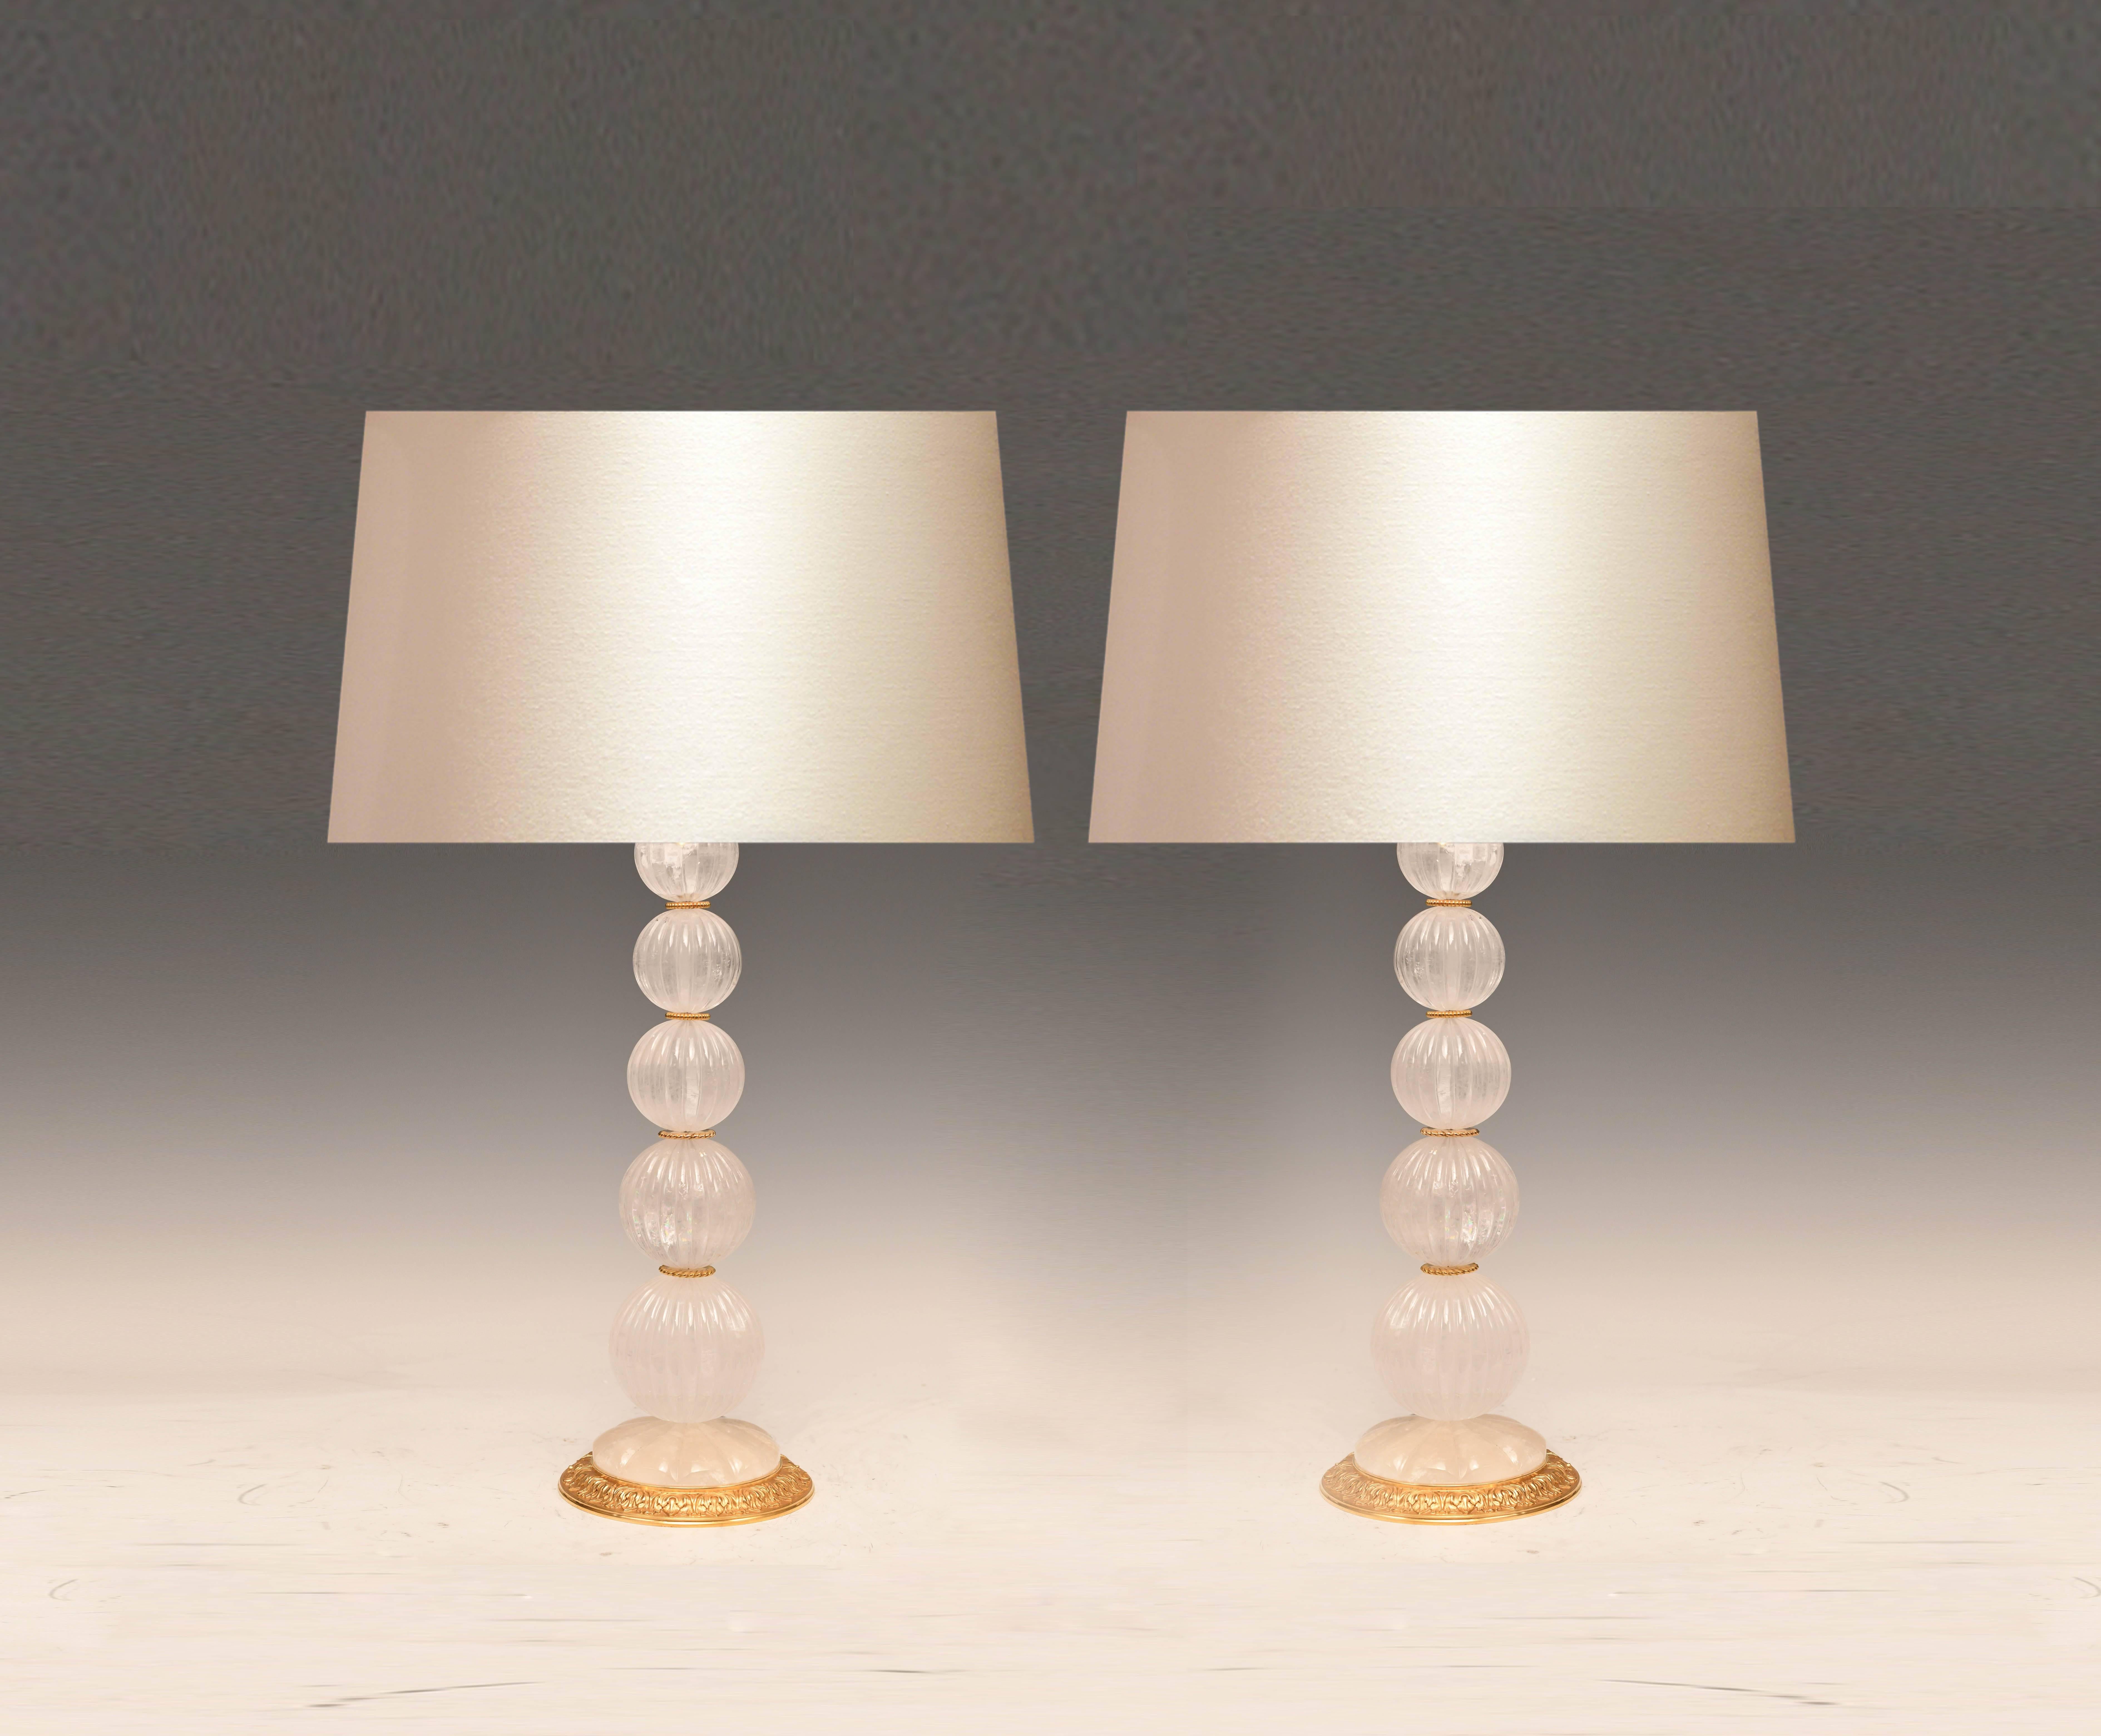 Pair of modern rock crystal quartz lamps with fine cast gilt brass base. Created by Phoenix Gallery NYC.
Measure: To the top of the rock crystal 22